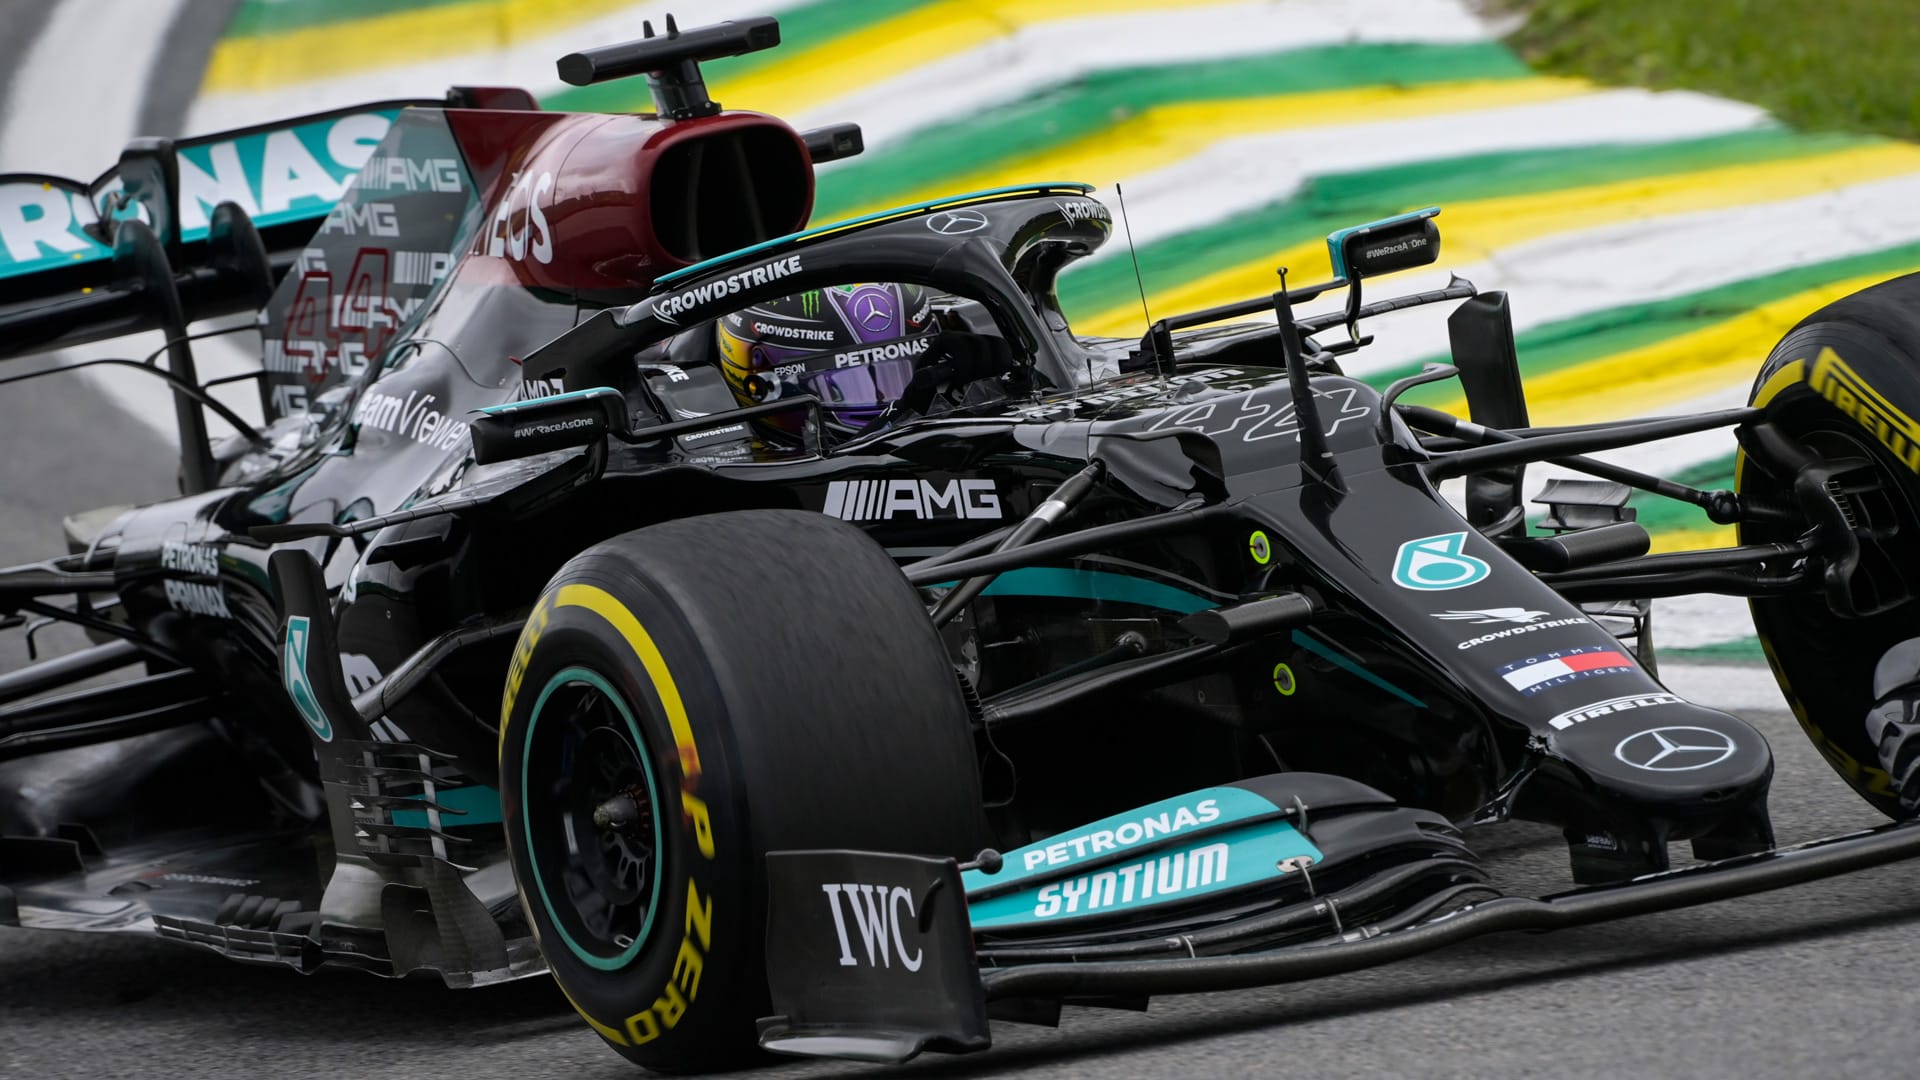 Lewis Hamilton disqualified from Brazil qualifying after DRS infringement Formula 1®